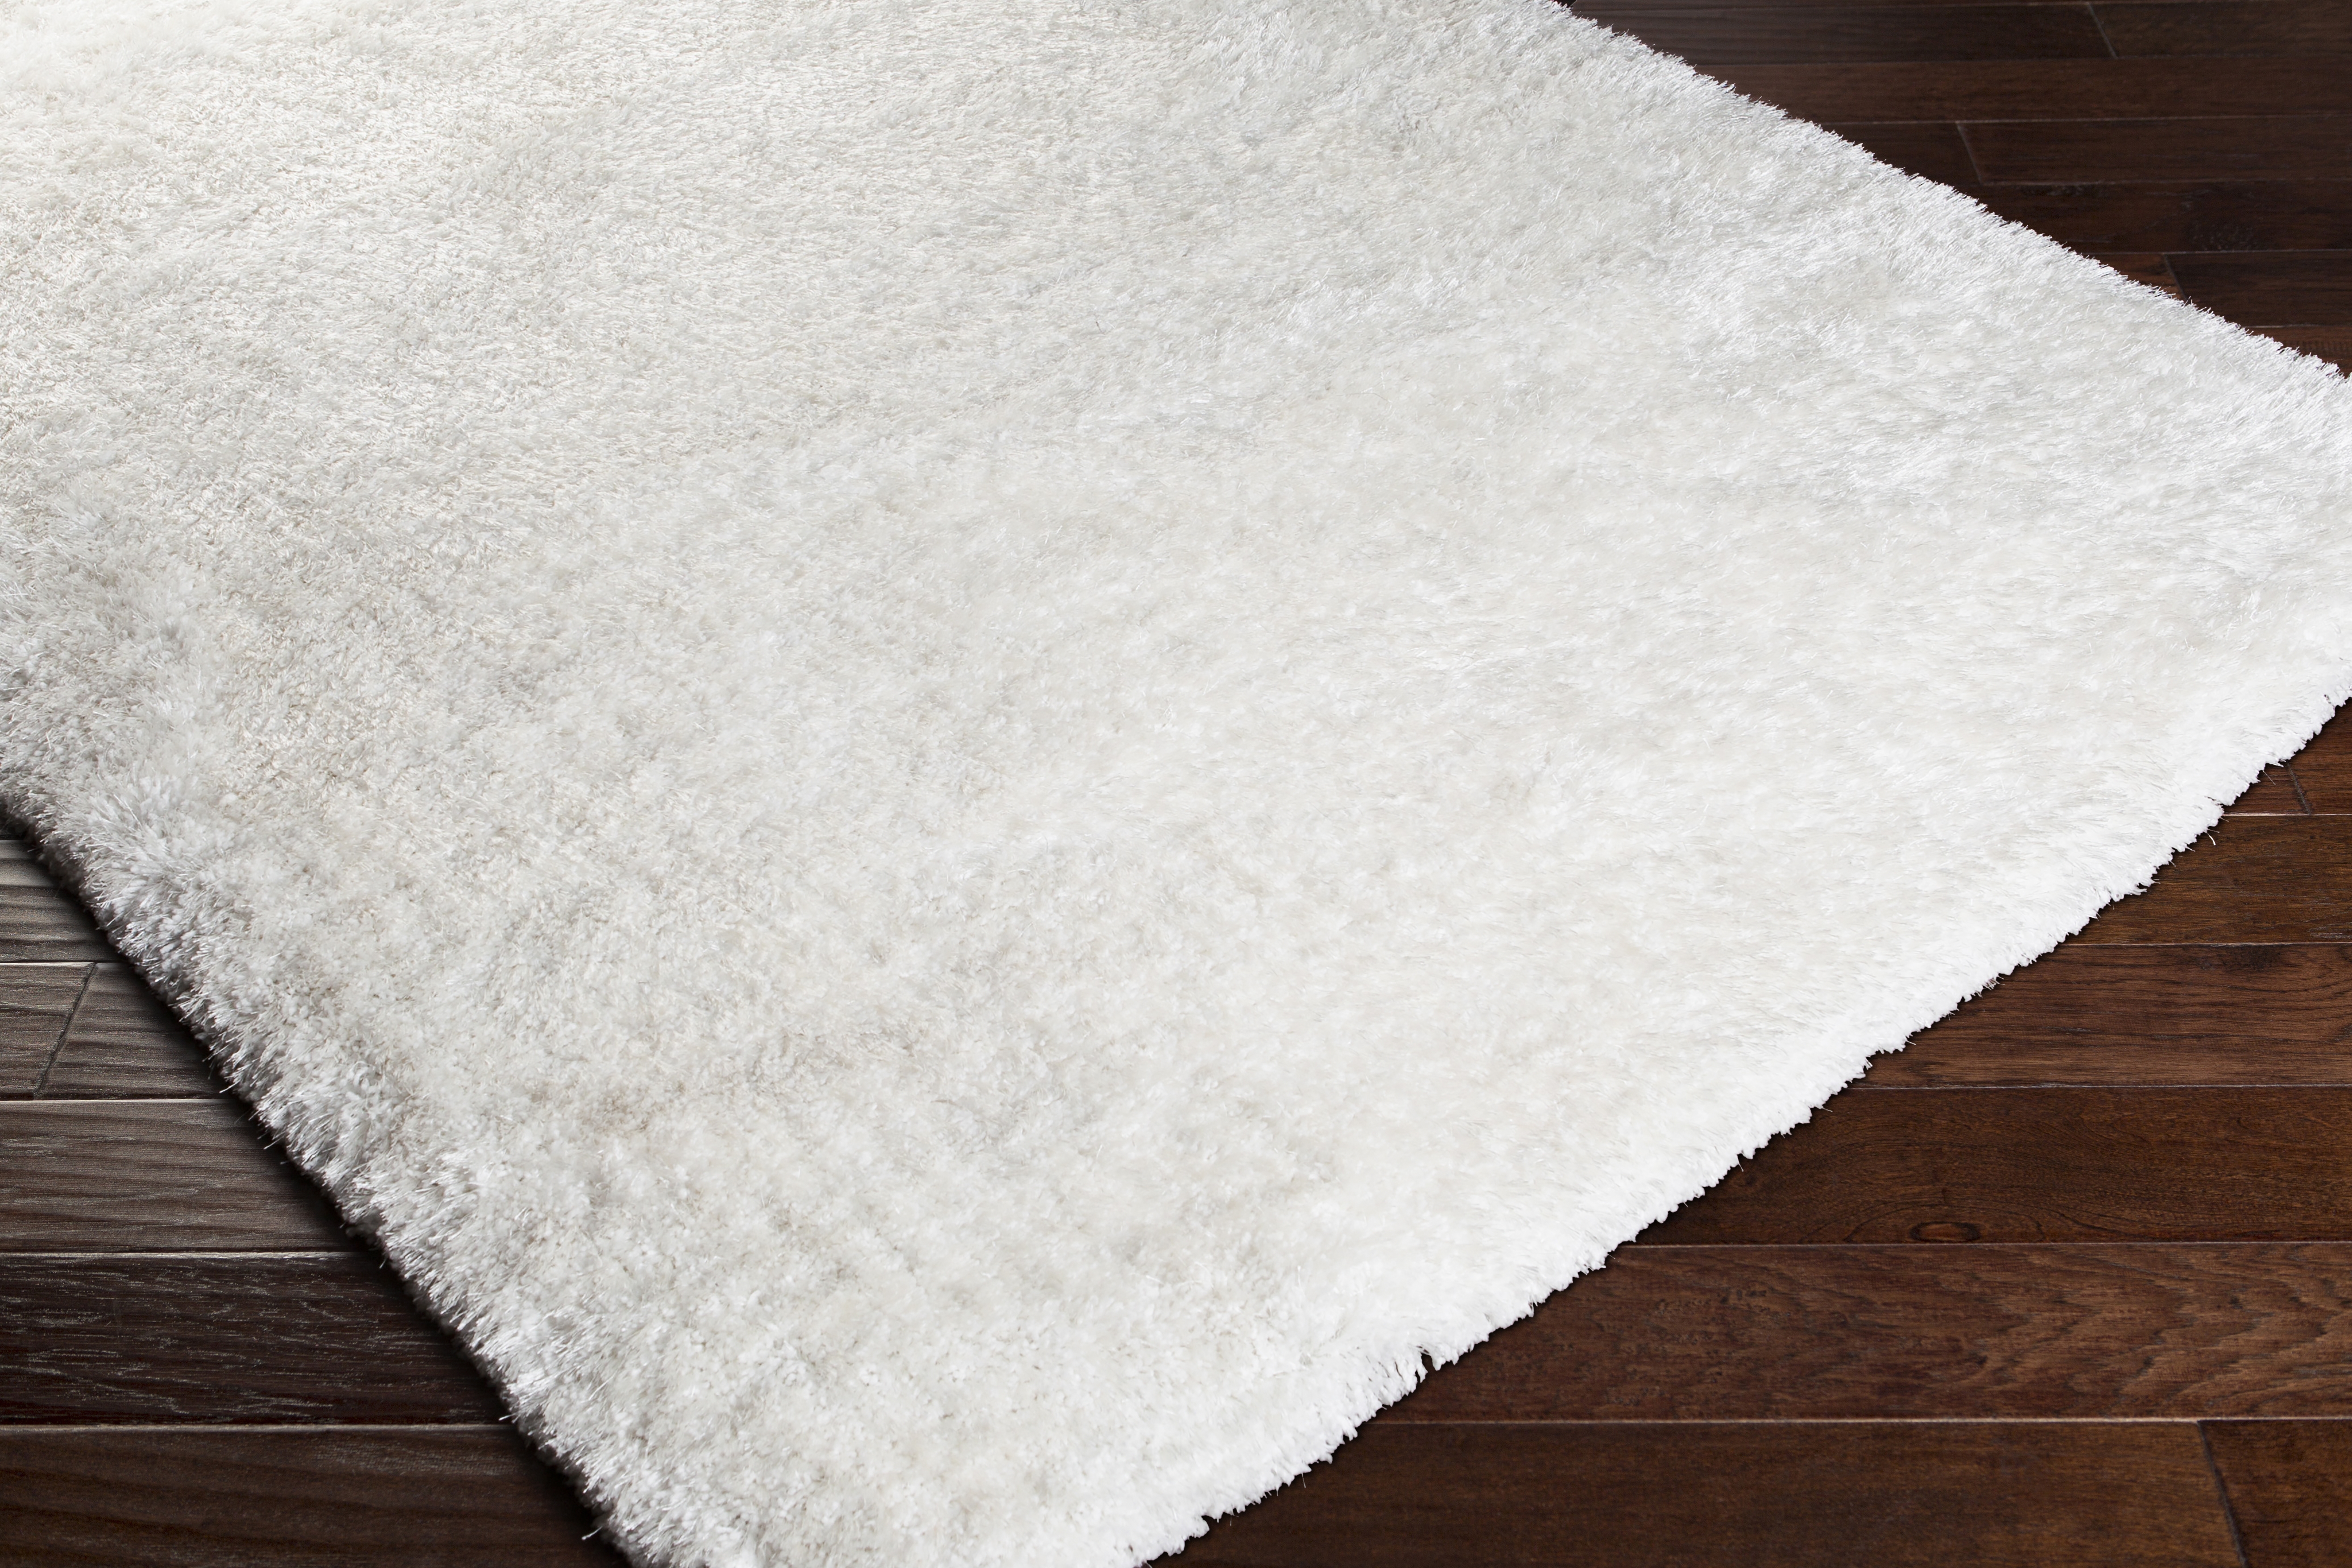 Grizzly Rug, 10' x 14' - Image 5